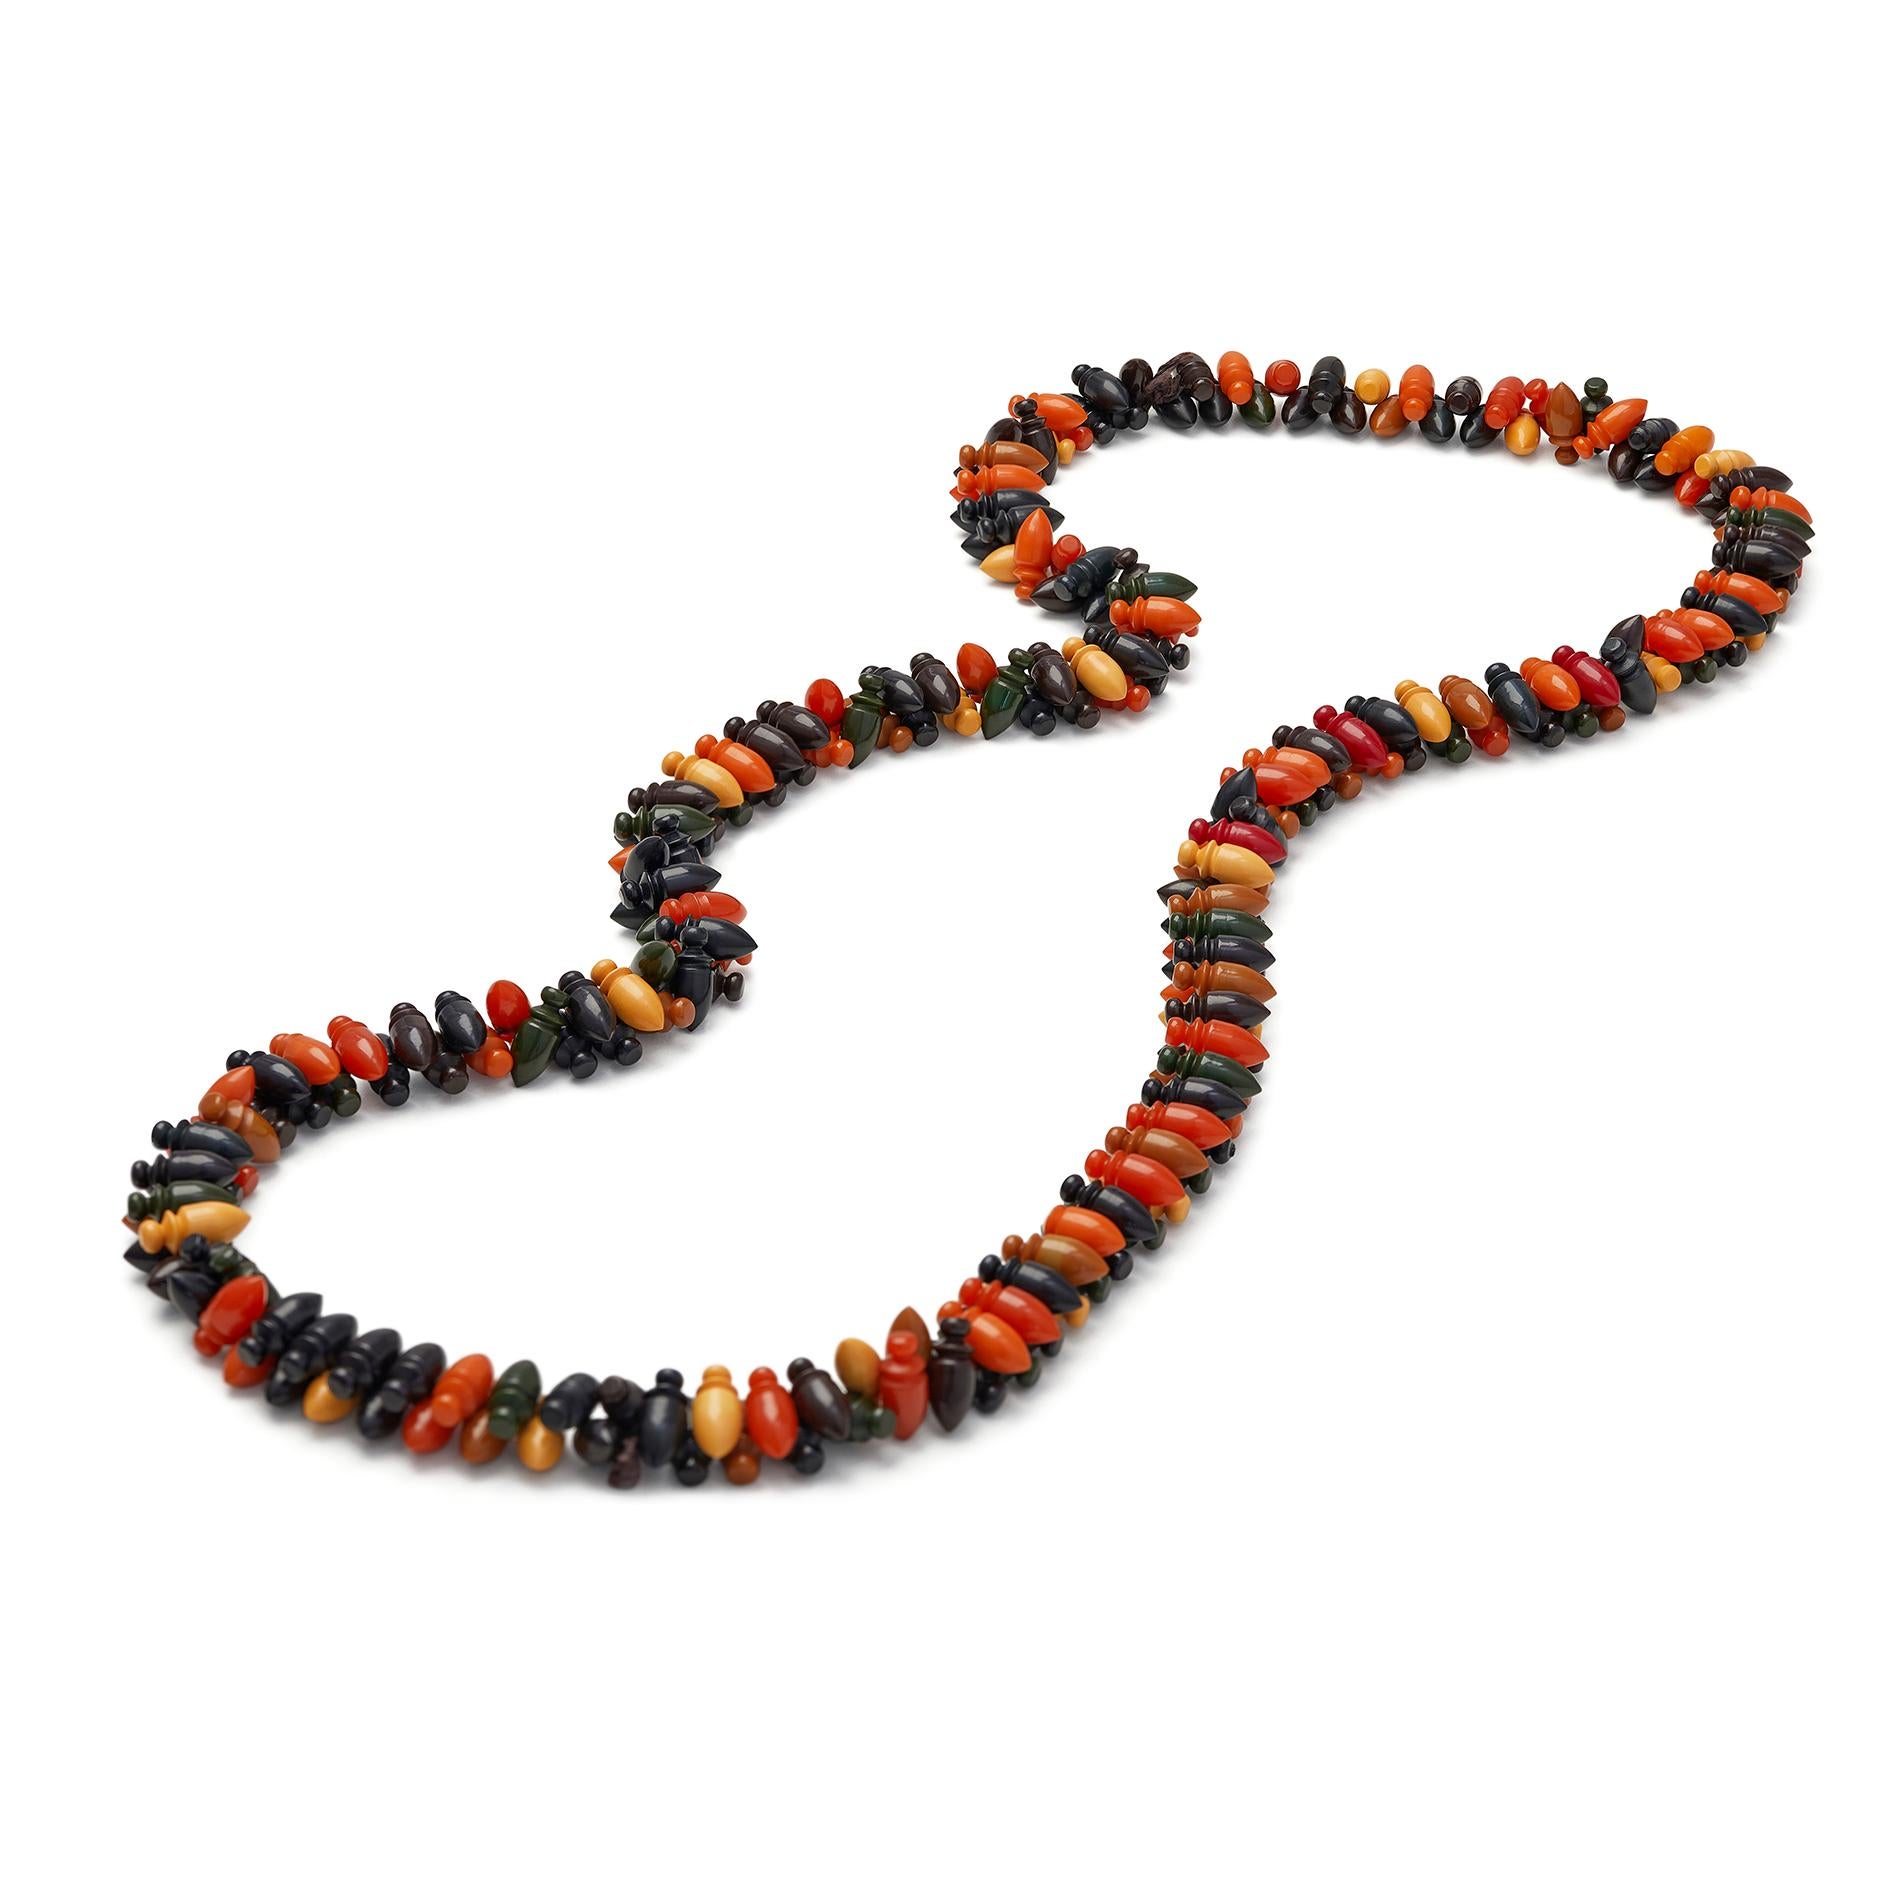 Impressive 1930s Bakelite necklace made up of multicoloured beads in various shades of dark green, mustard, orange, tan, red, brown and black - colours which were given food-related names such as Creamed Corn, Butterscotch, Egg Yolk, and Salmon.